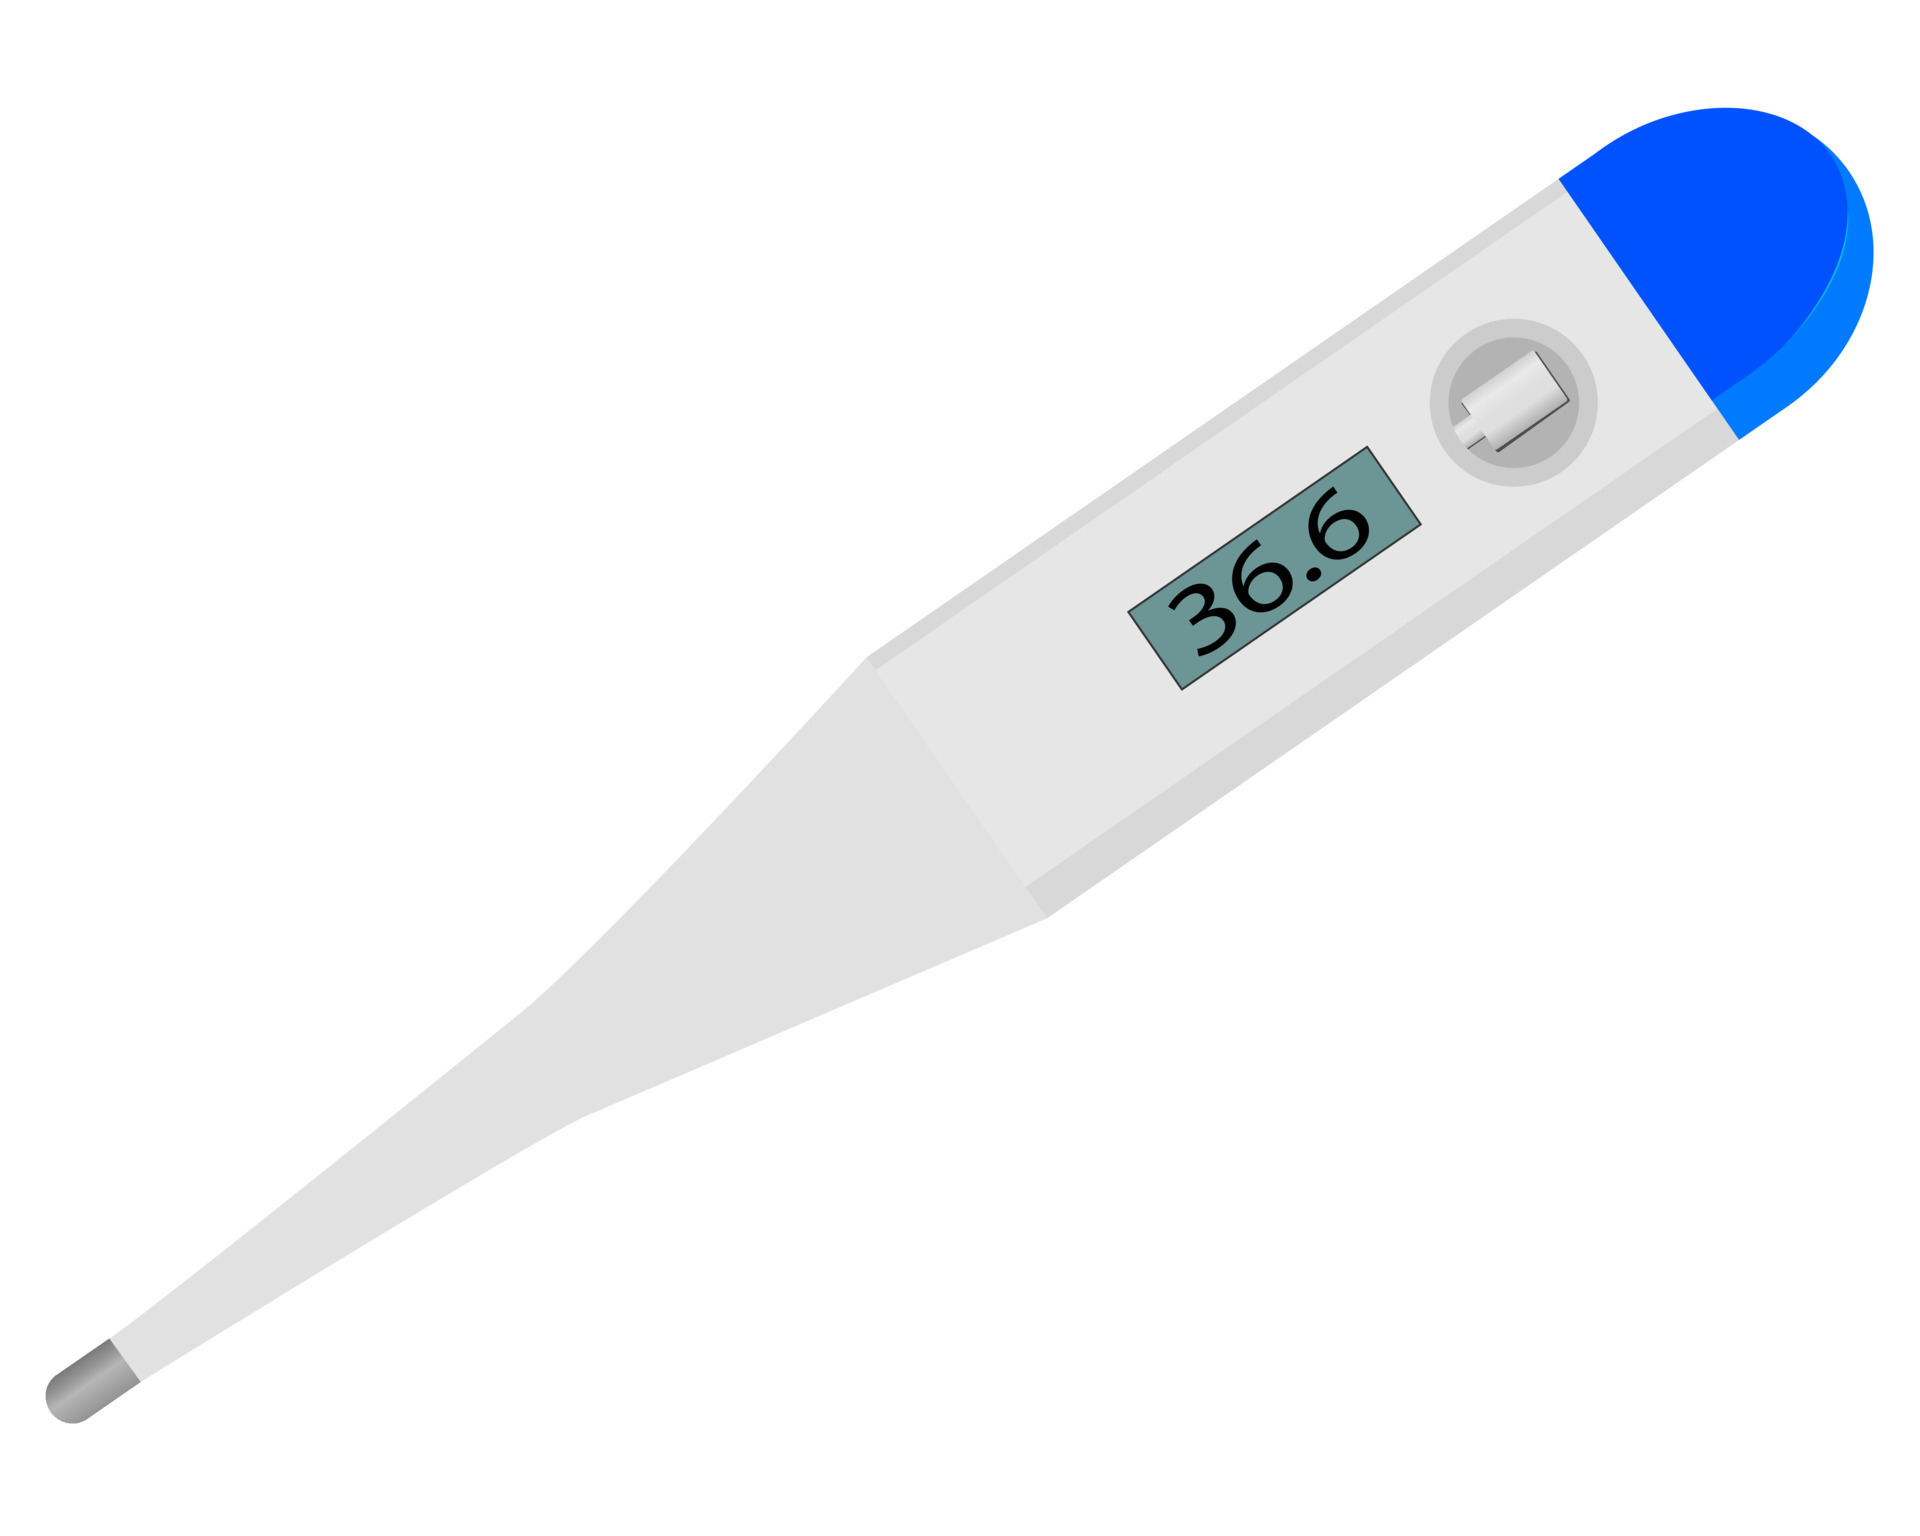 https://static.vecteezy.com/system/resources/previews/011/144/216/original/electronic-digital-thermometer-for-body-temperature-on-a-white-background-vector.jpg